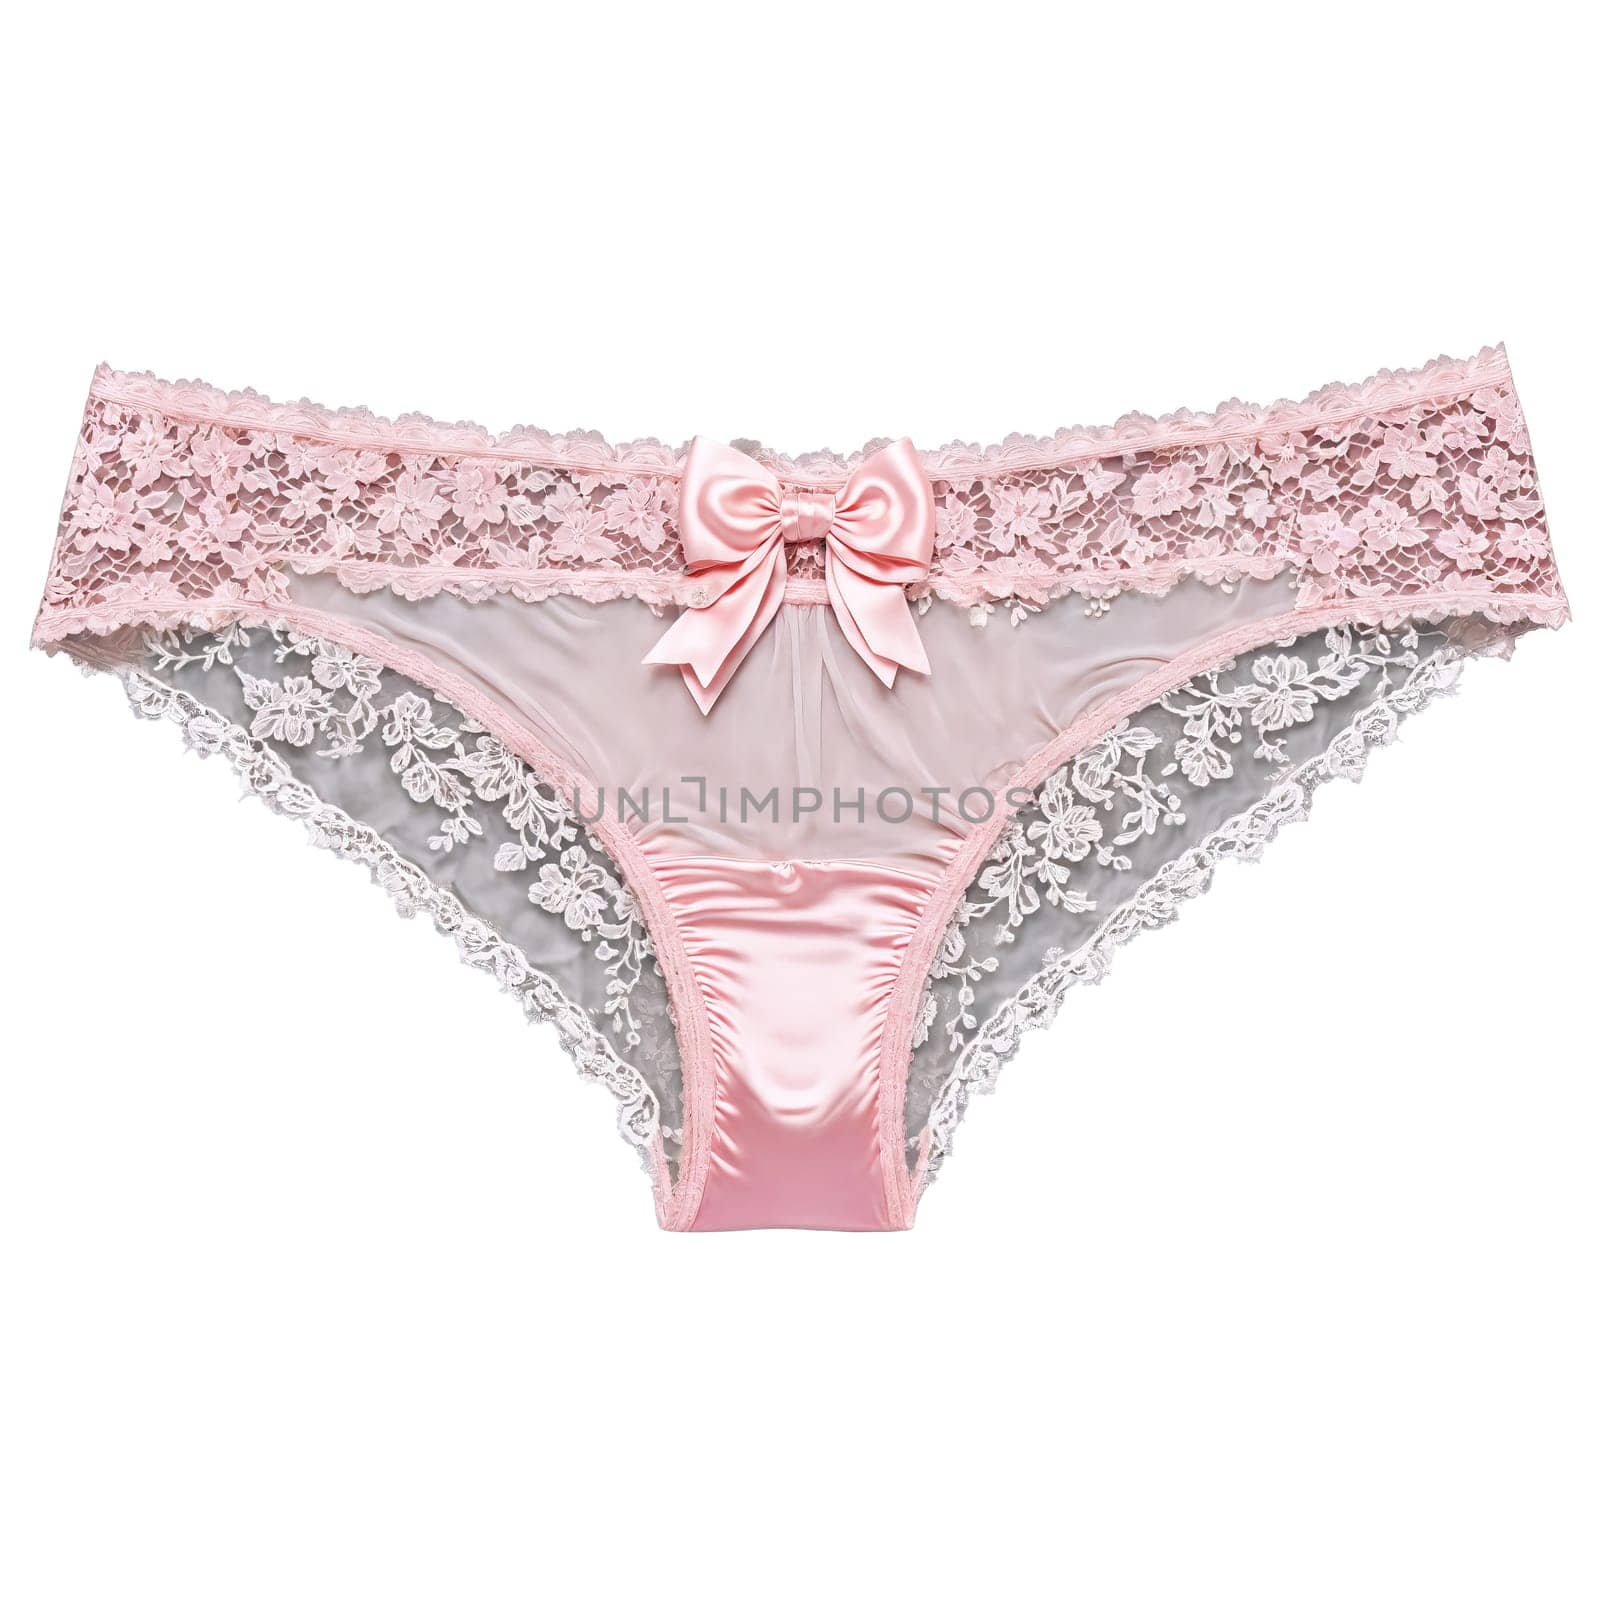 Pink Lace Underwear A pair of pink lace women s underwear with delicate lace detailing by panophotograph